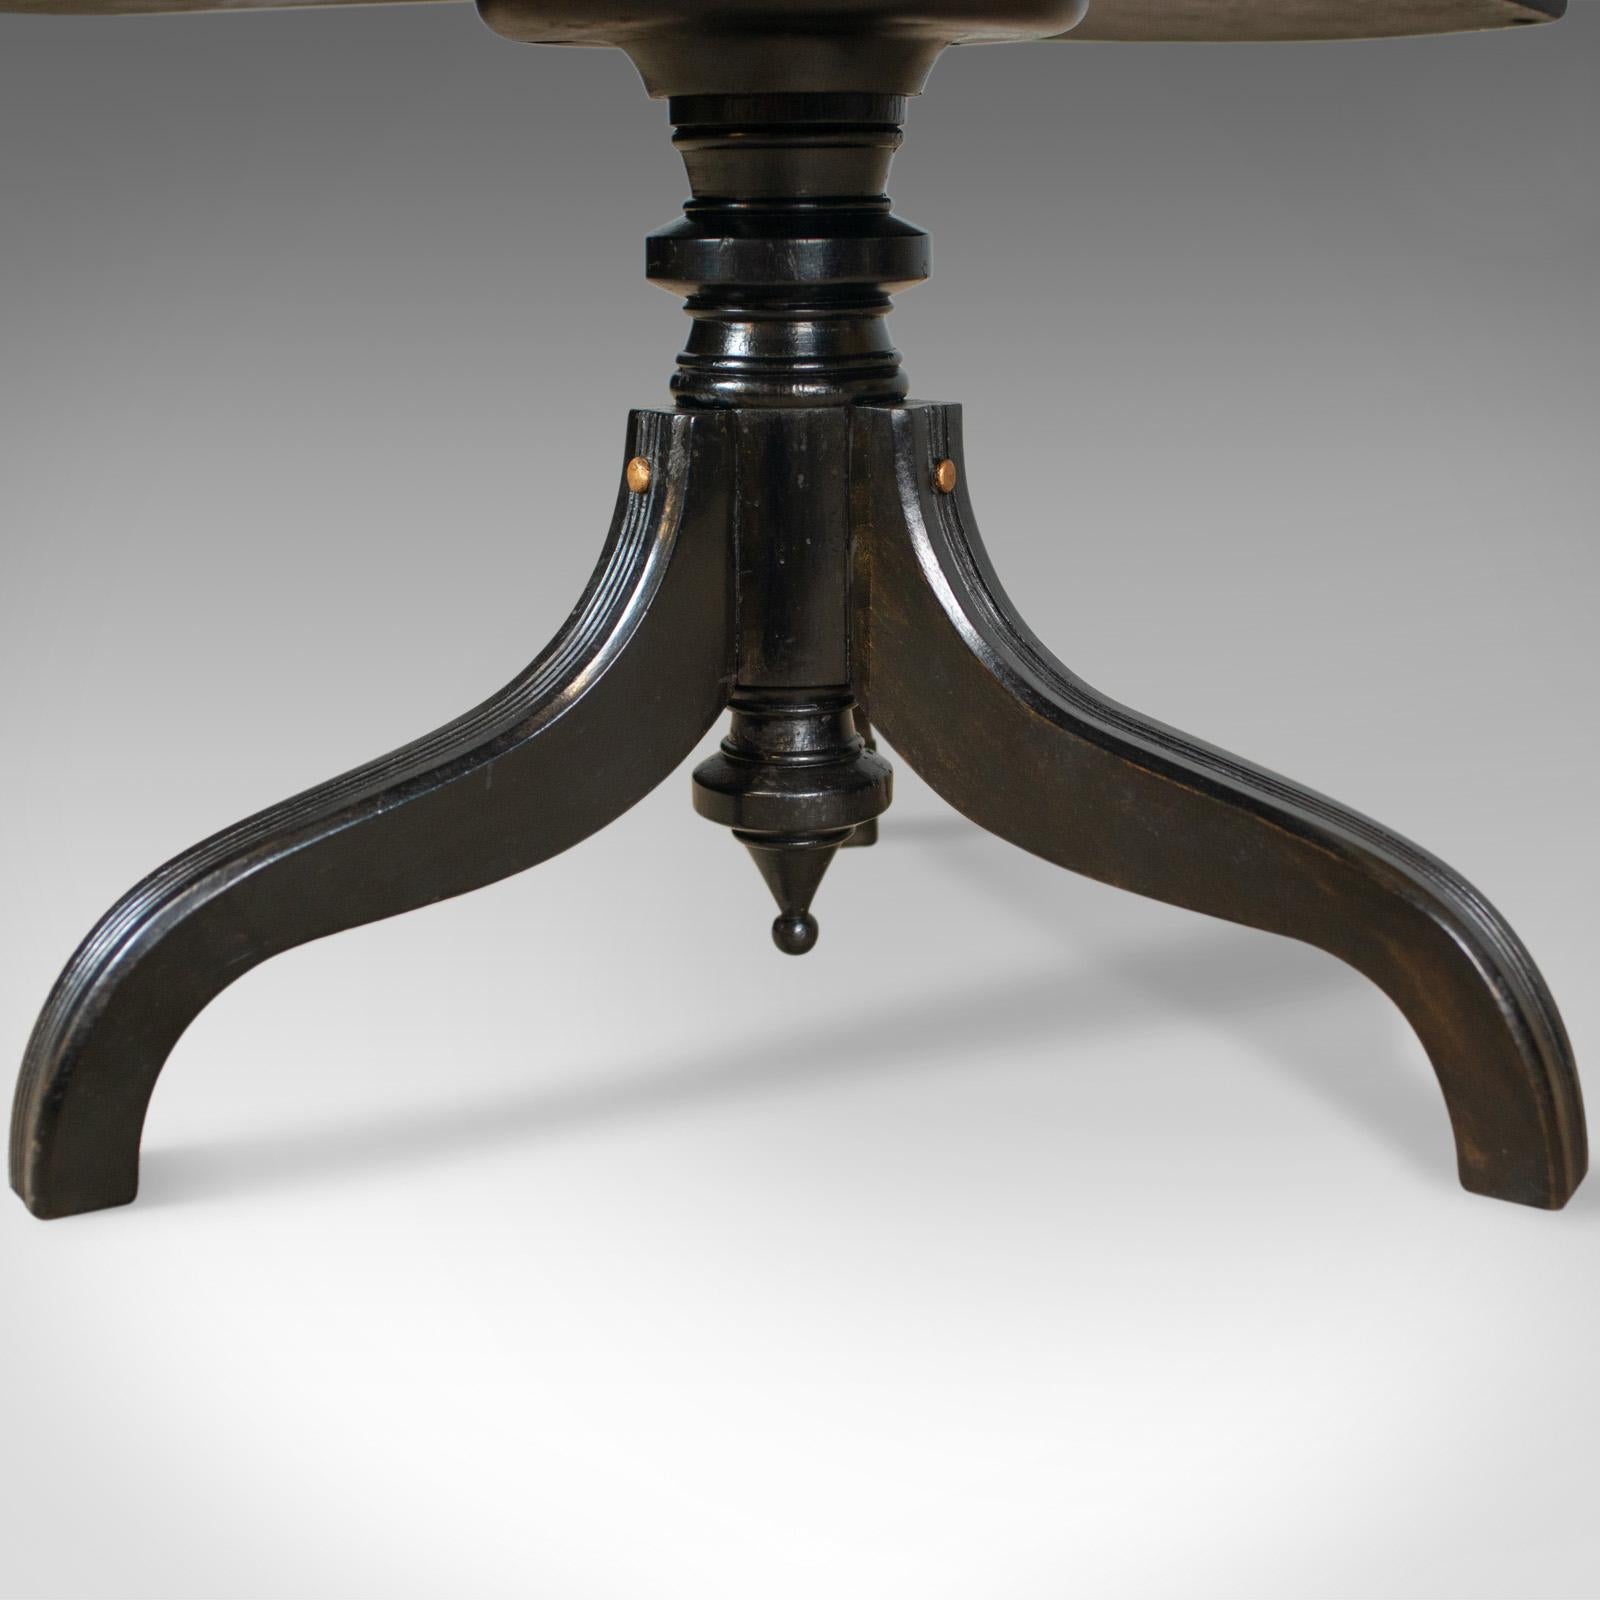 Aesthetic Period Reading Table, English, Victorian, Ebonised, Side, circa 1880 2